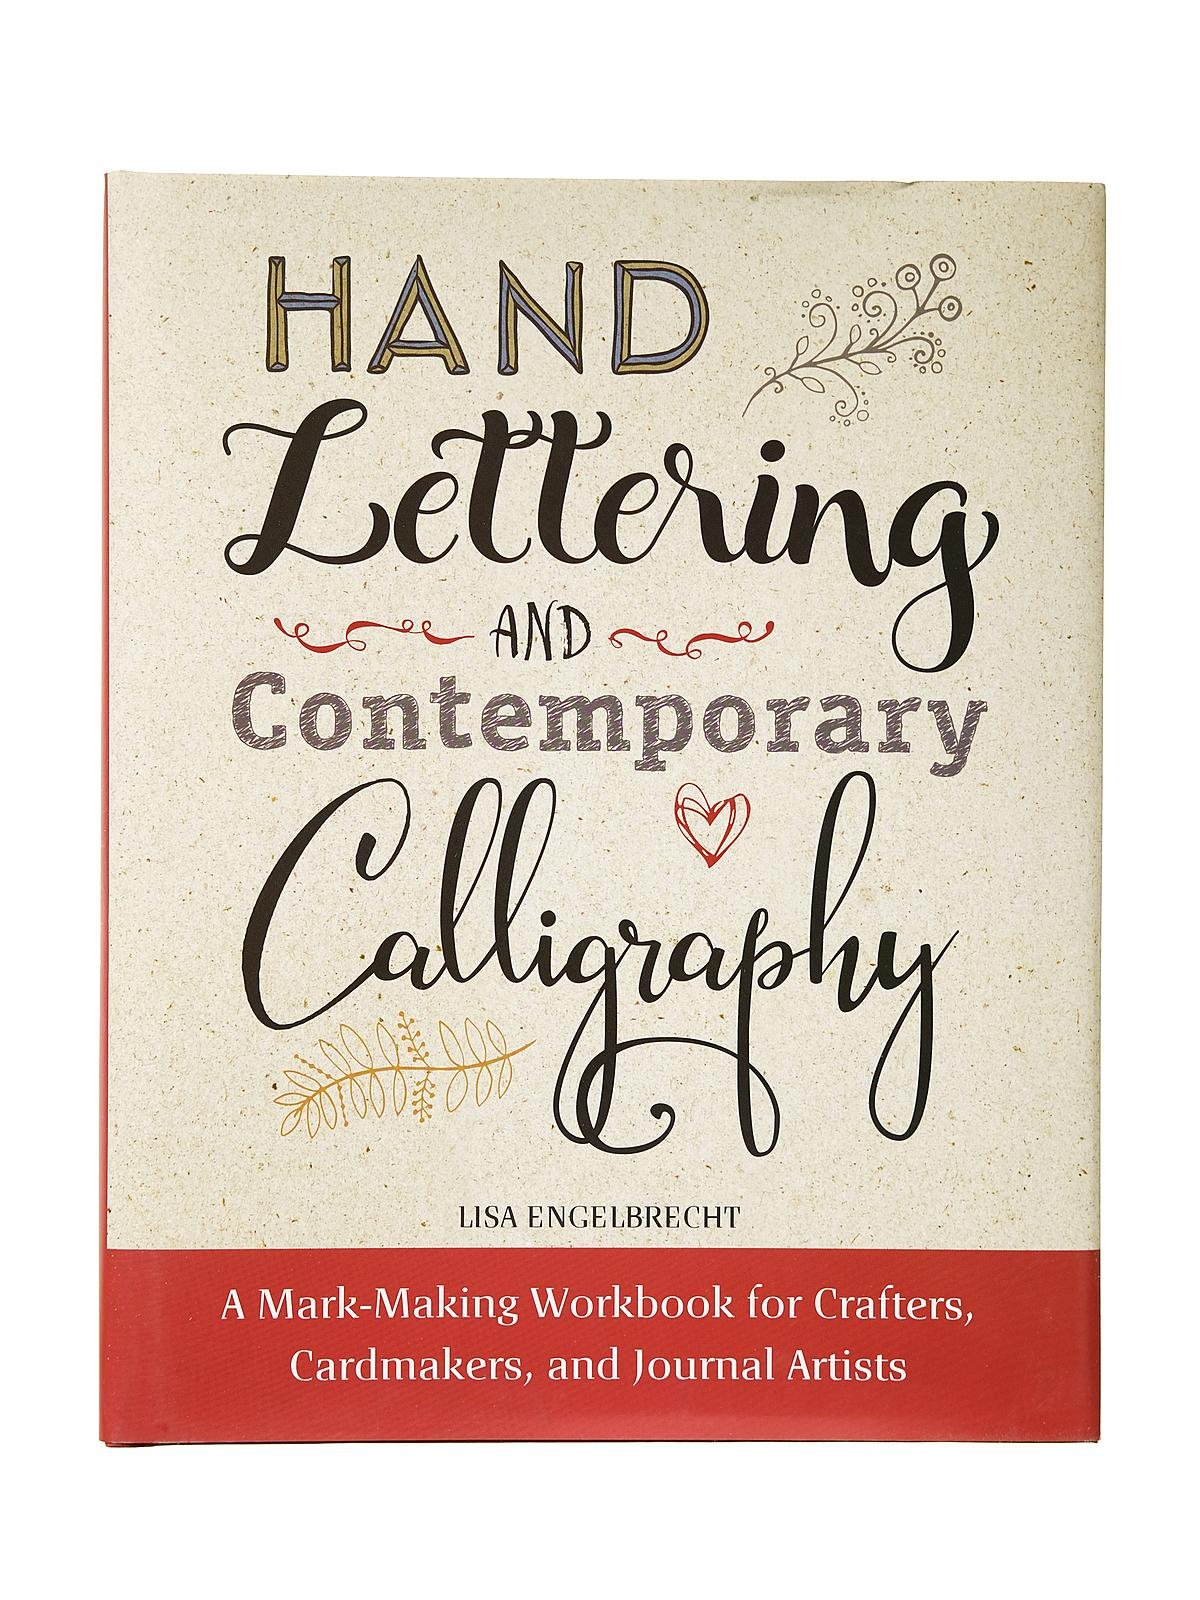 Crestline - Hand Lettering and Contemporary Calligraphy